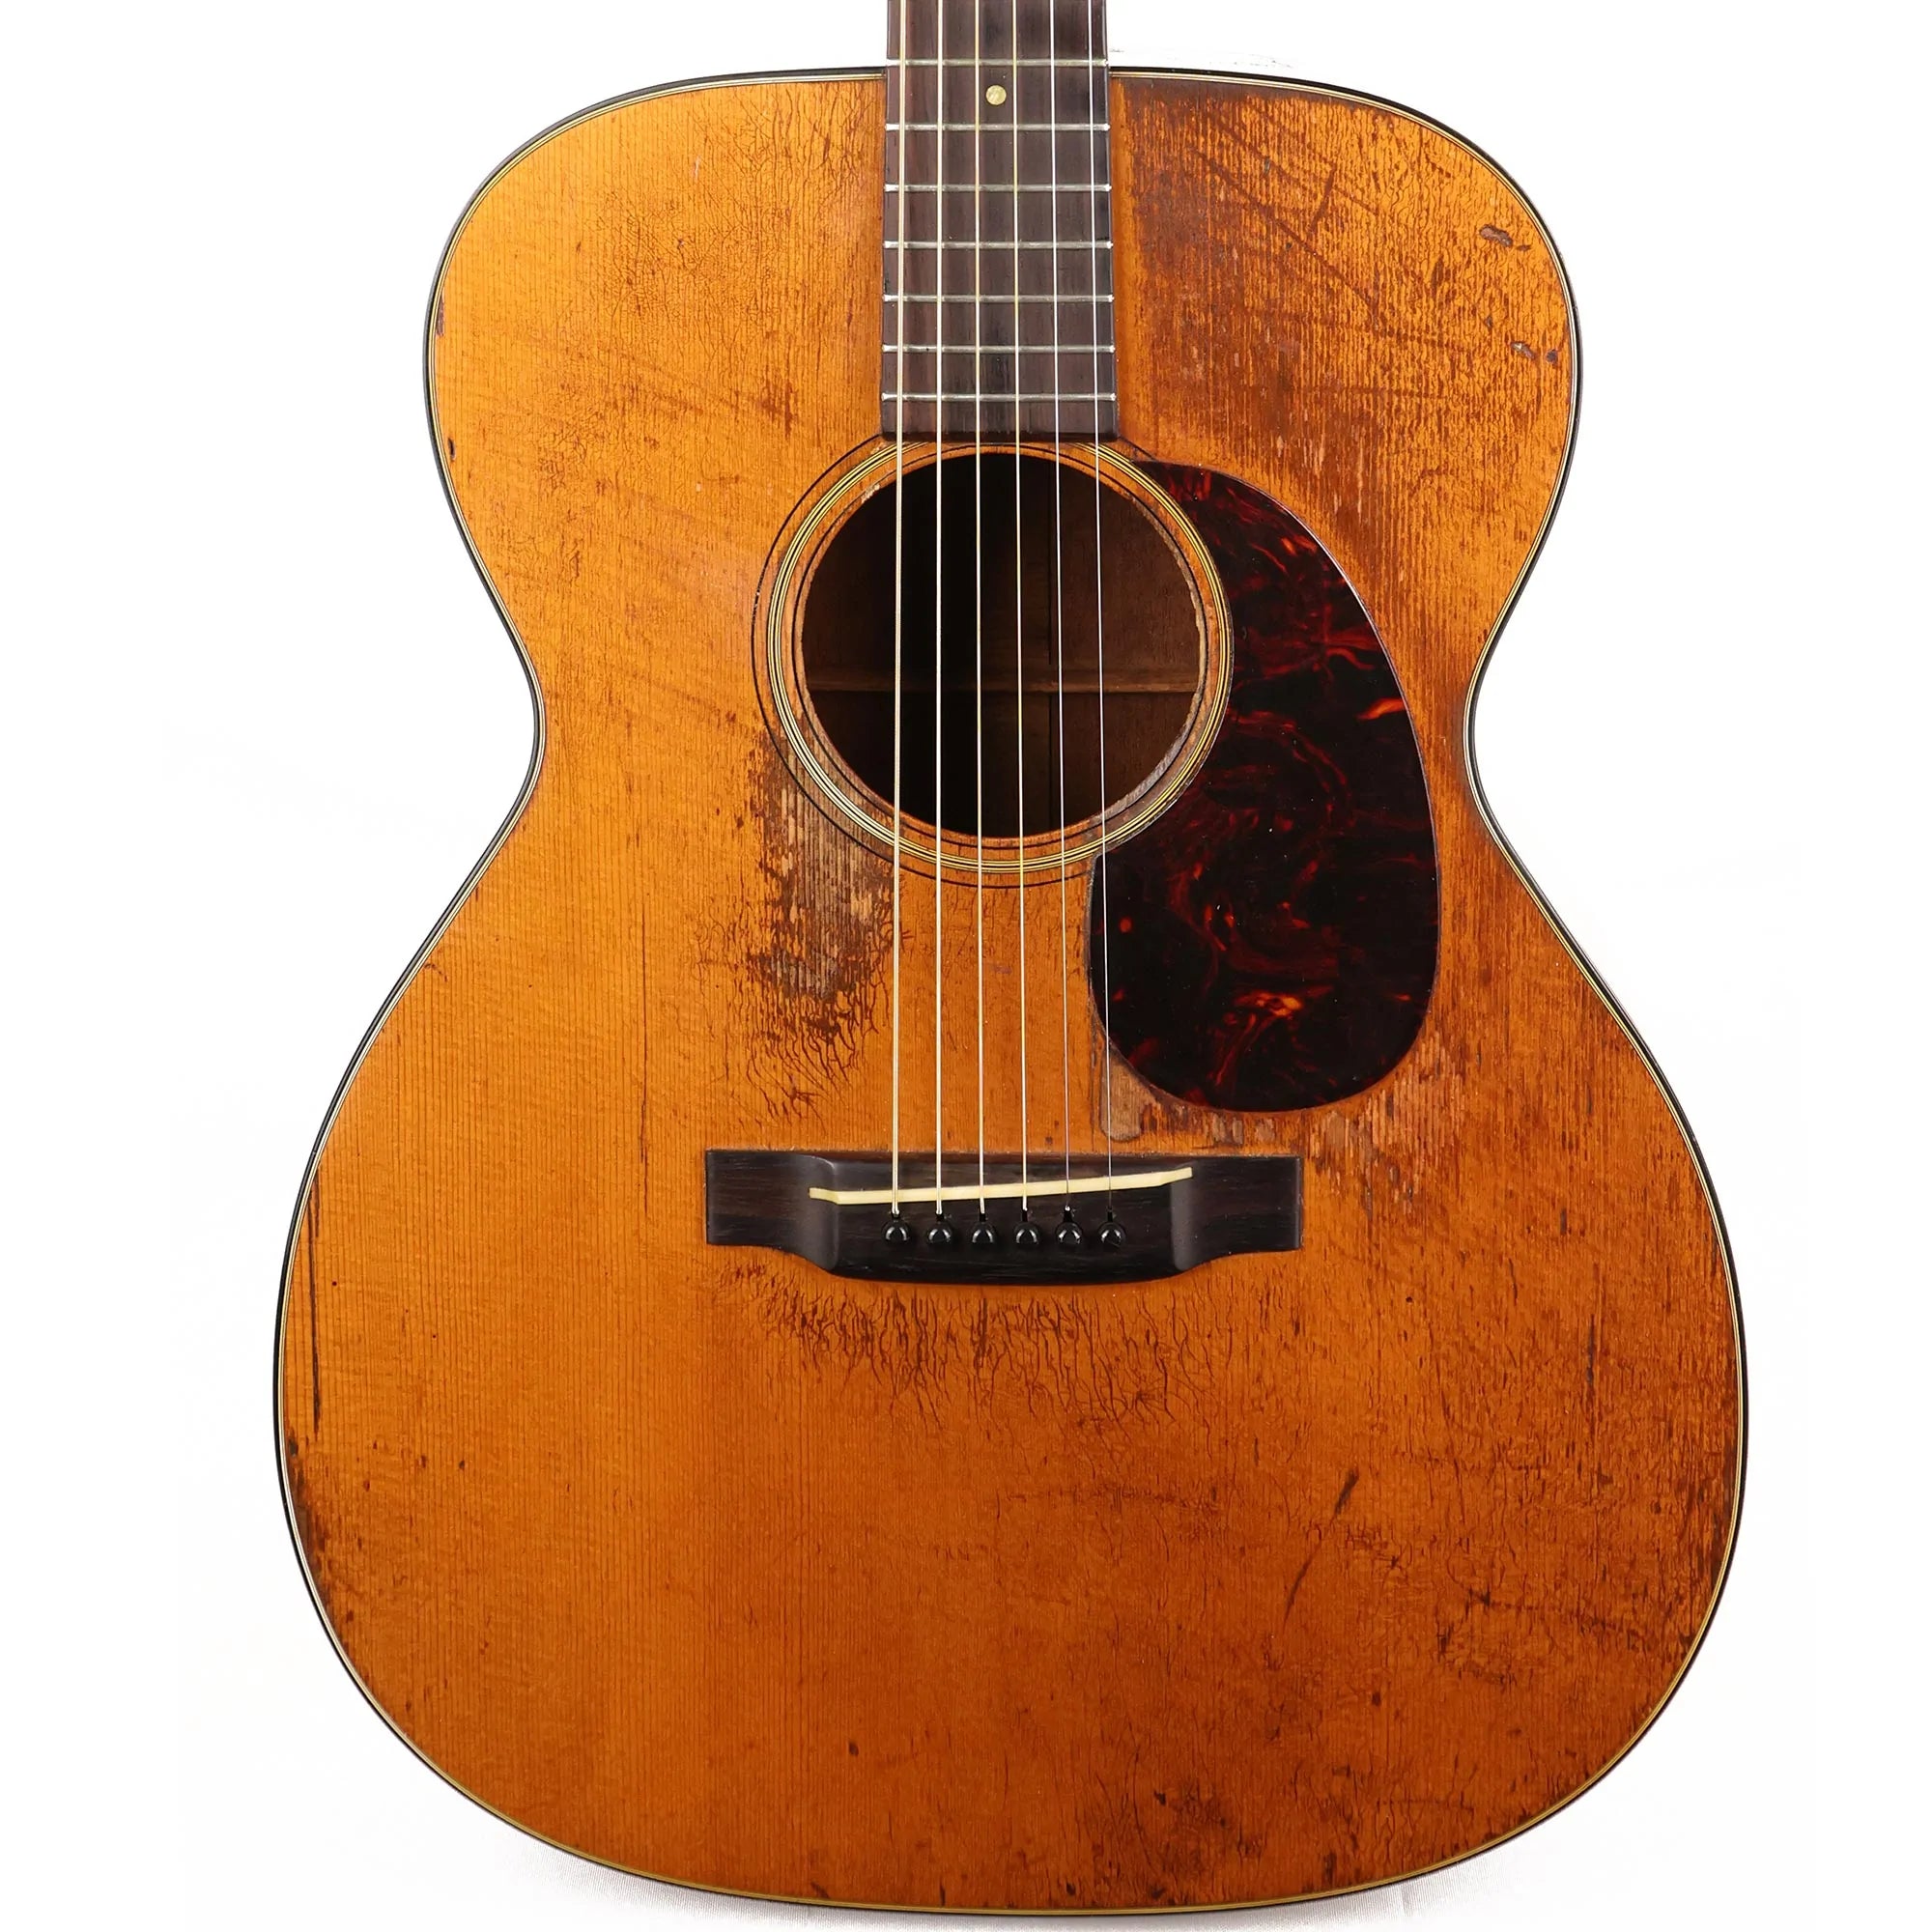 1967 Martin 000-18 Acoustic Guitar | The Music Zoo